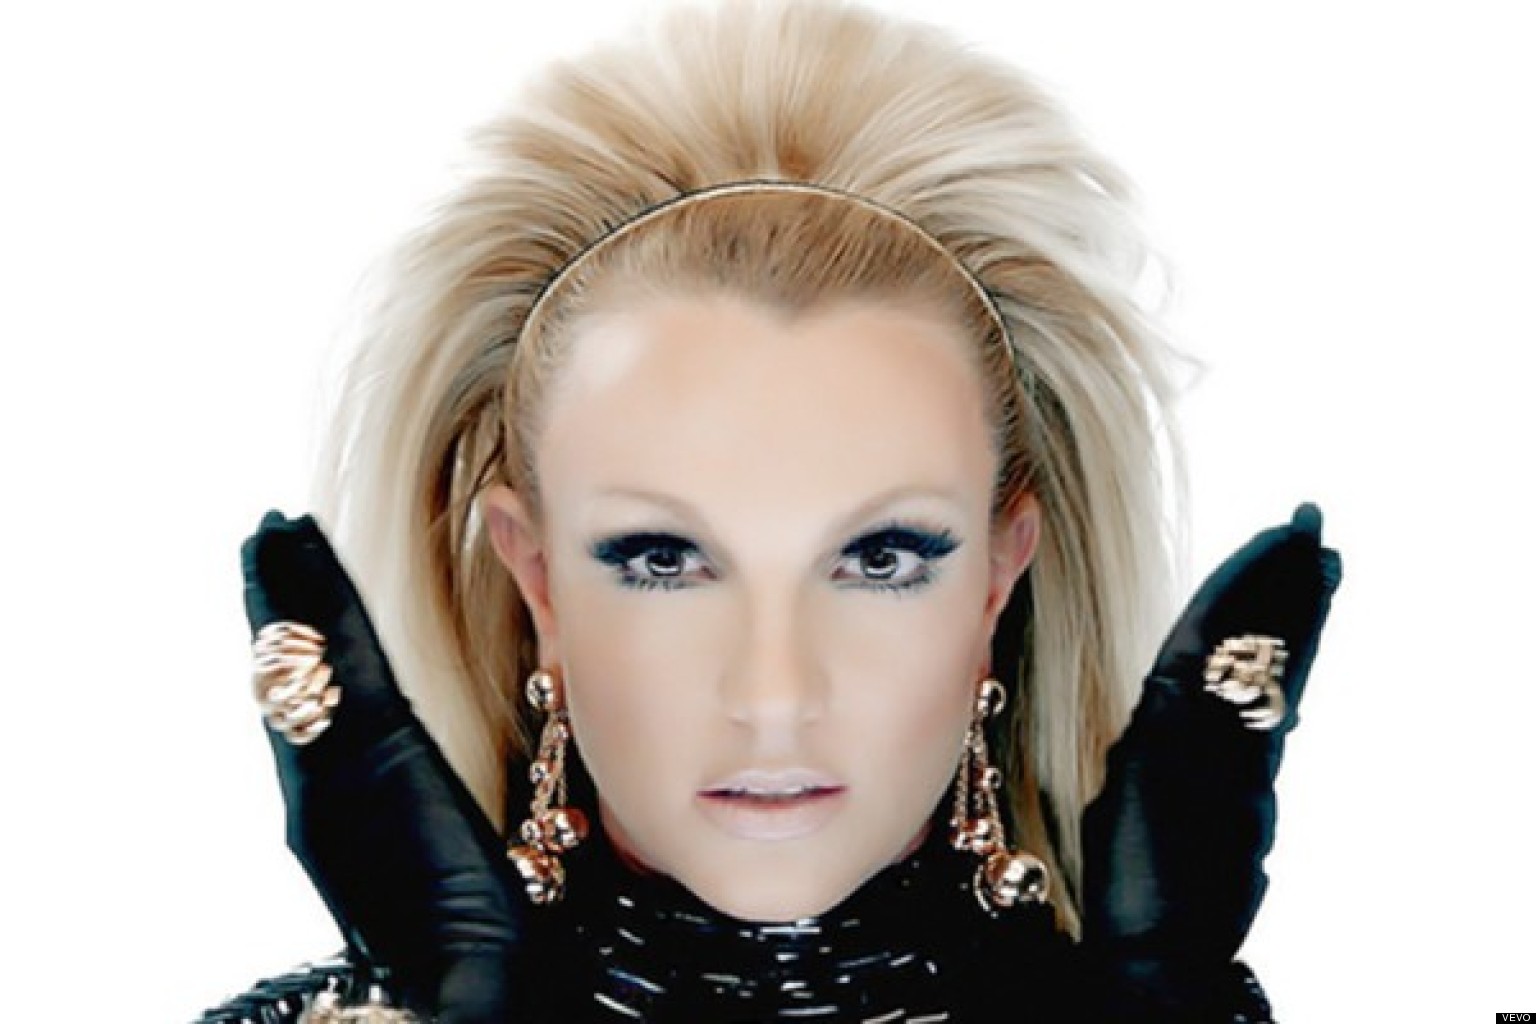 Britney Spears Face1536 x 1024